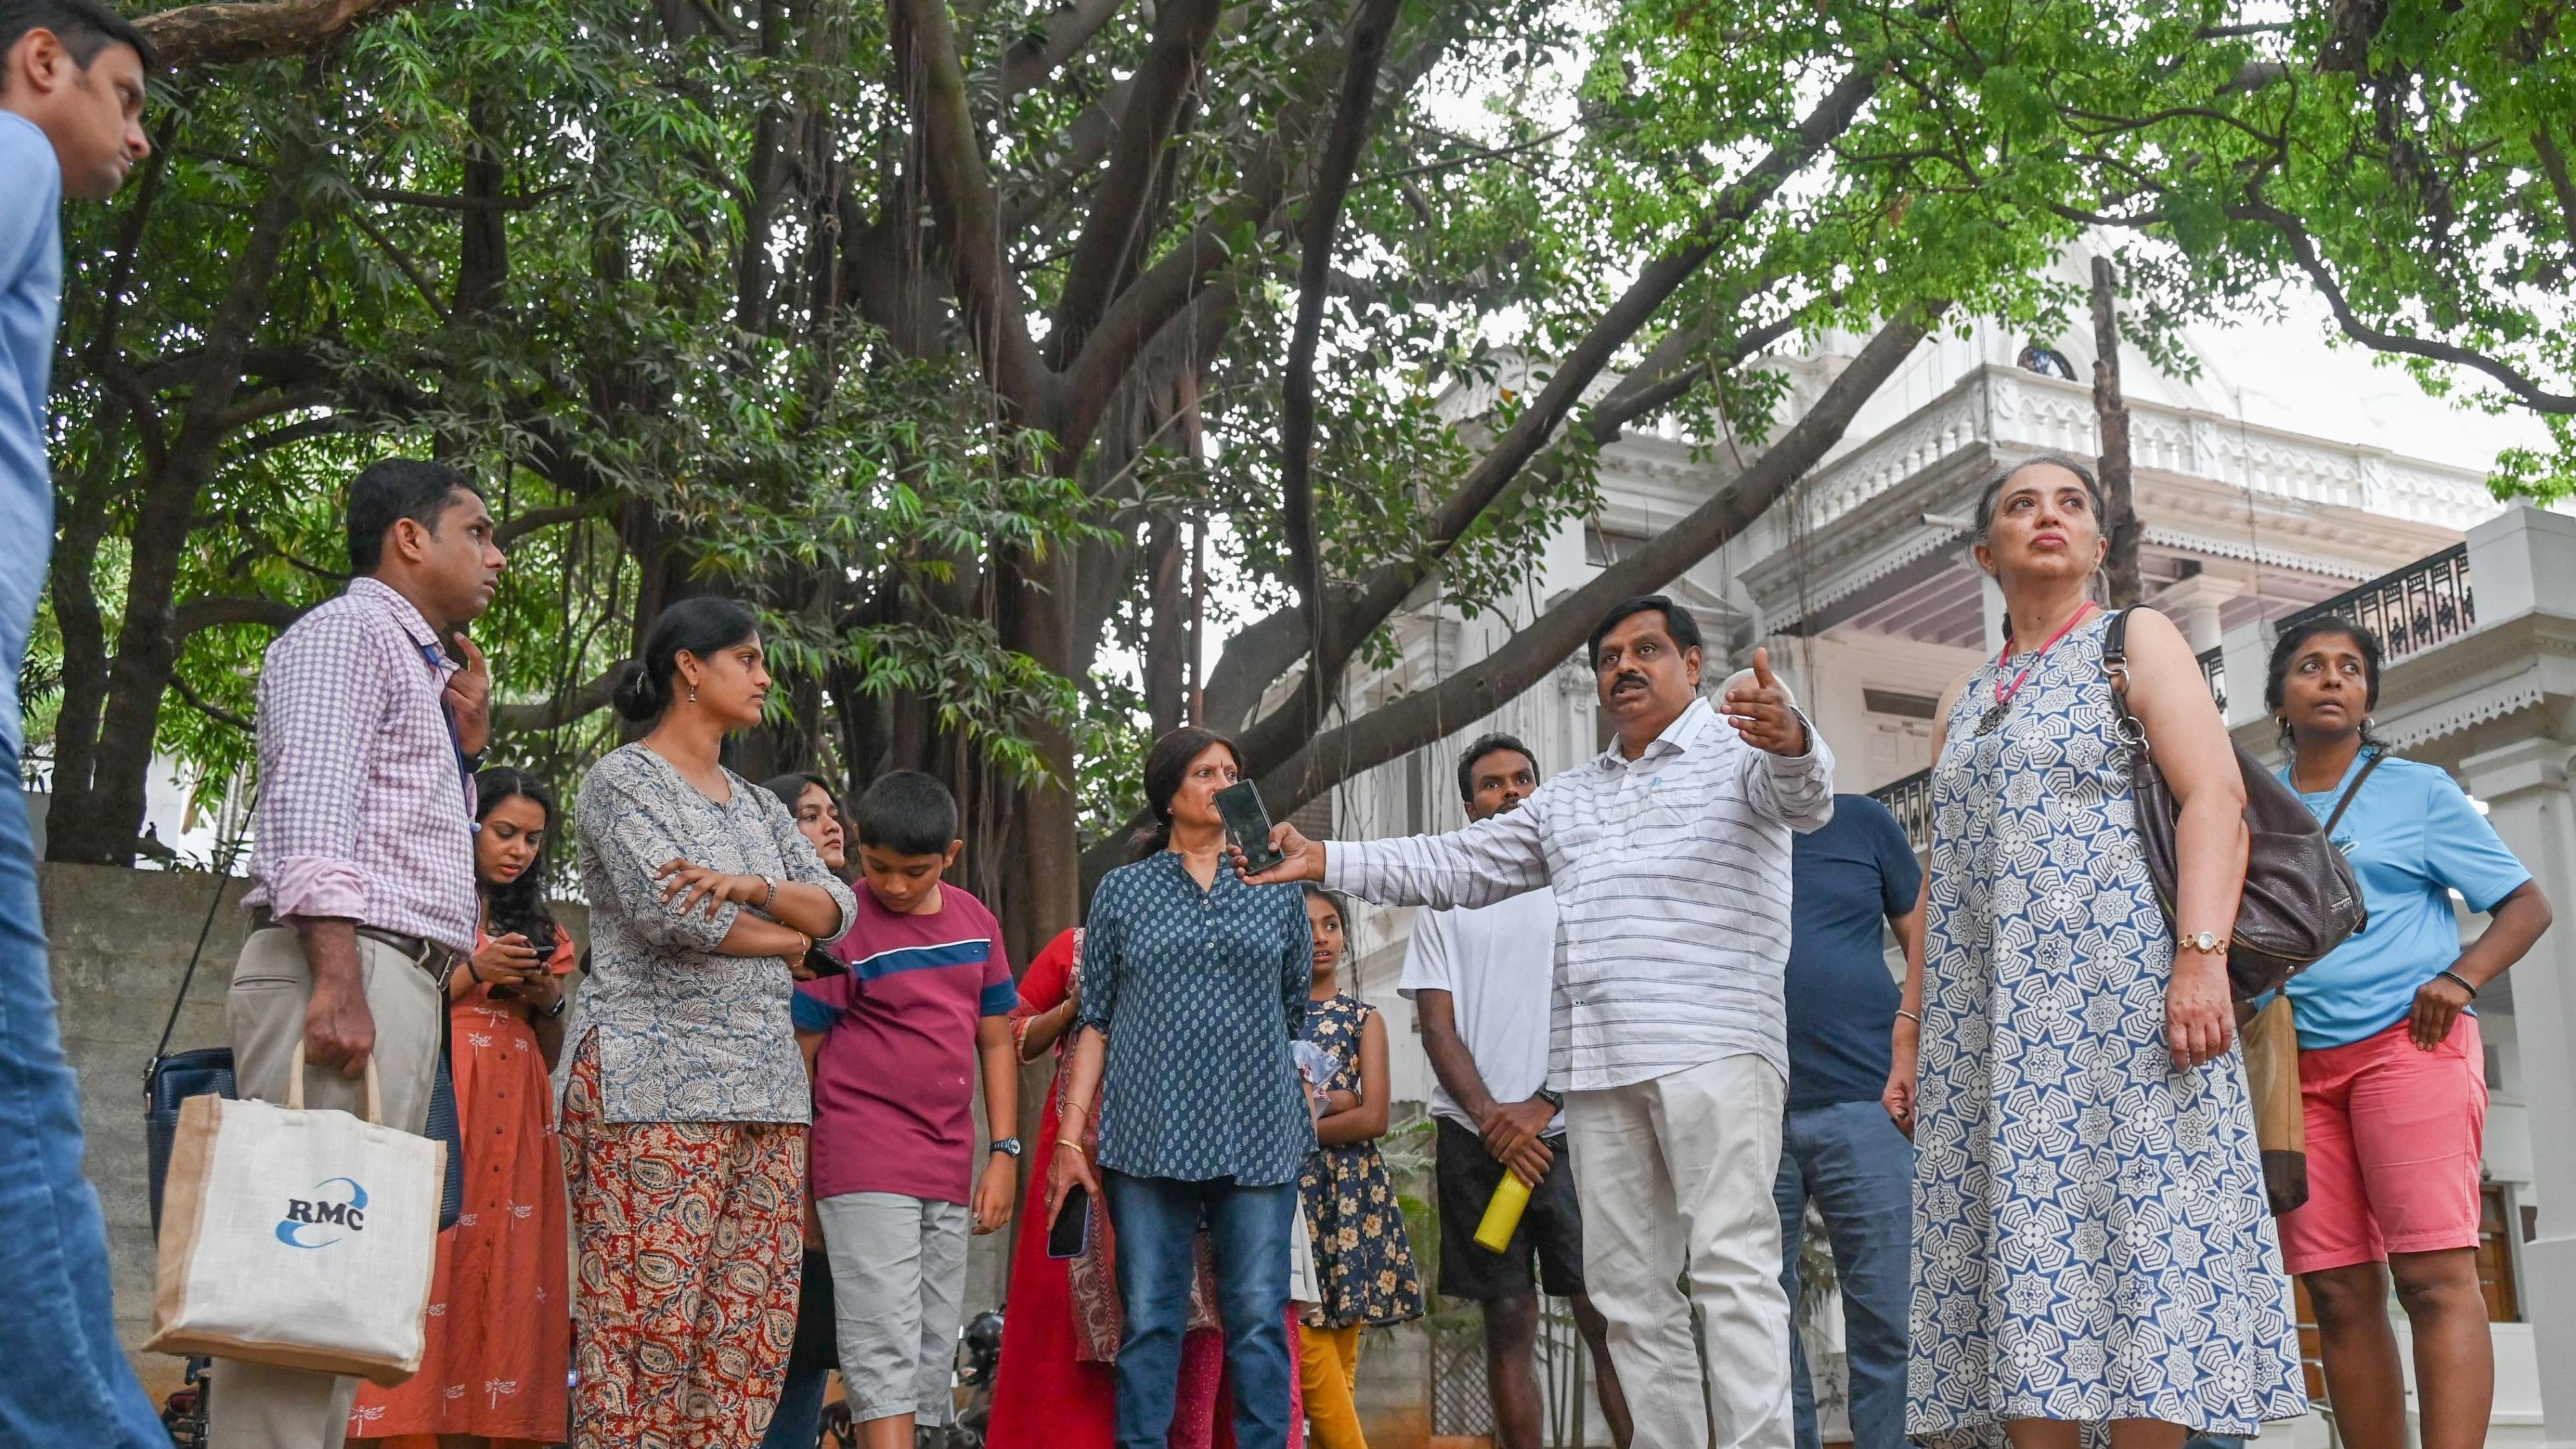 <div class="paragraphs"><p>B S Chandrashekhar, a scientist at the Institute of Wood Science and Technology, leads the tree walk in Bengaluru on Saturday.&nbsp;</p></div>